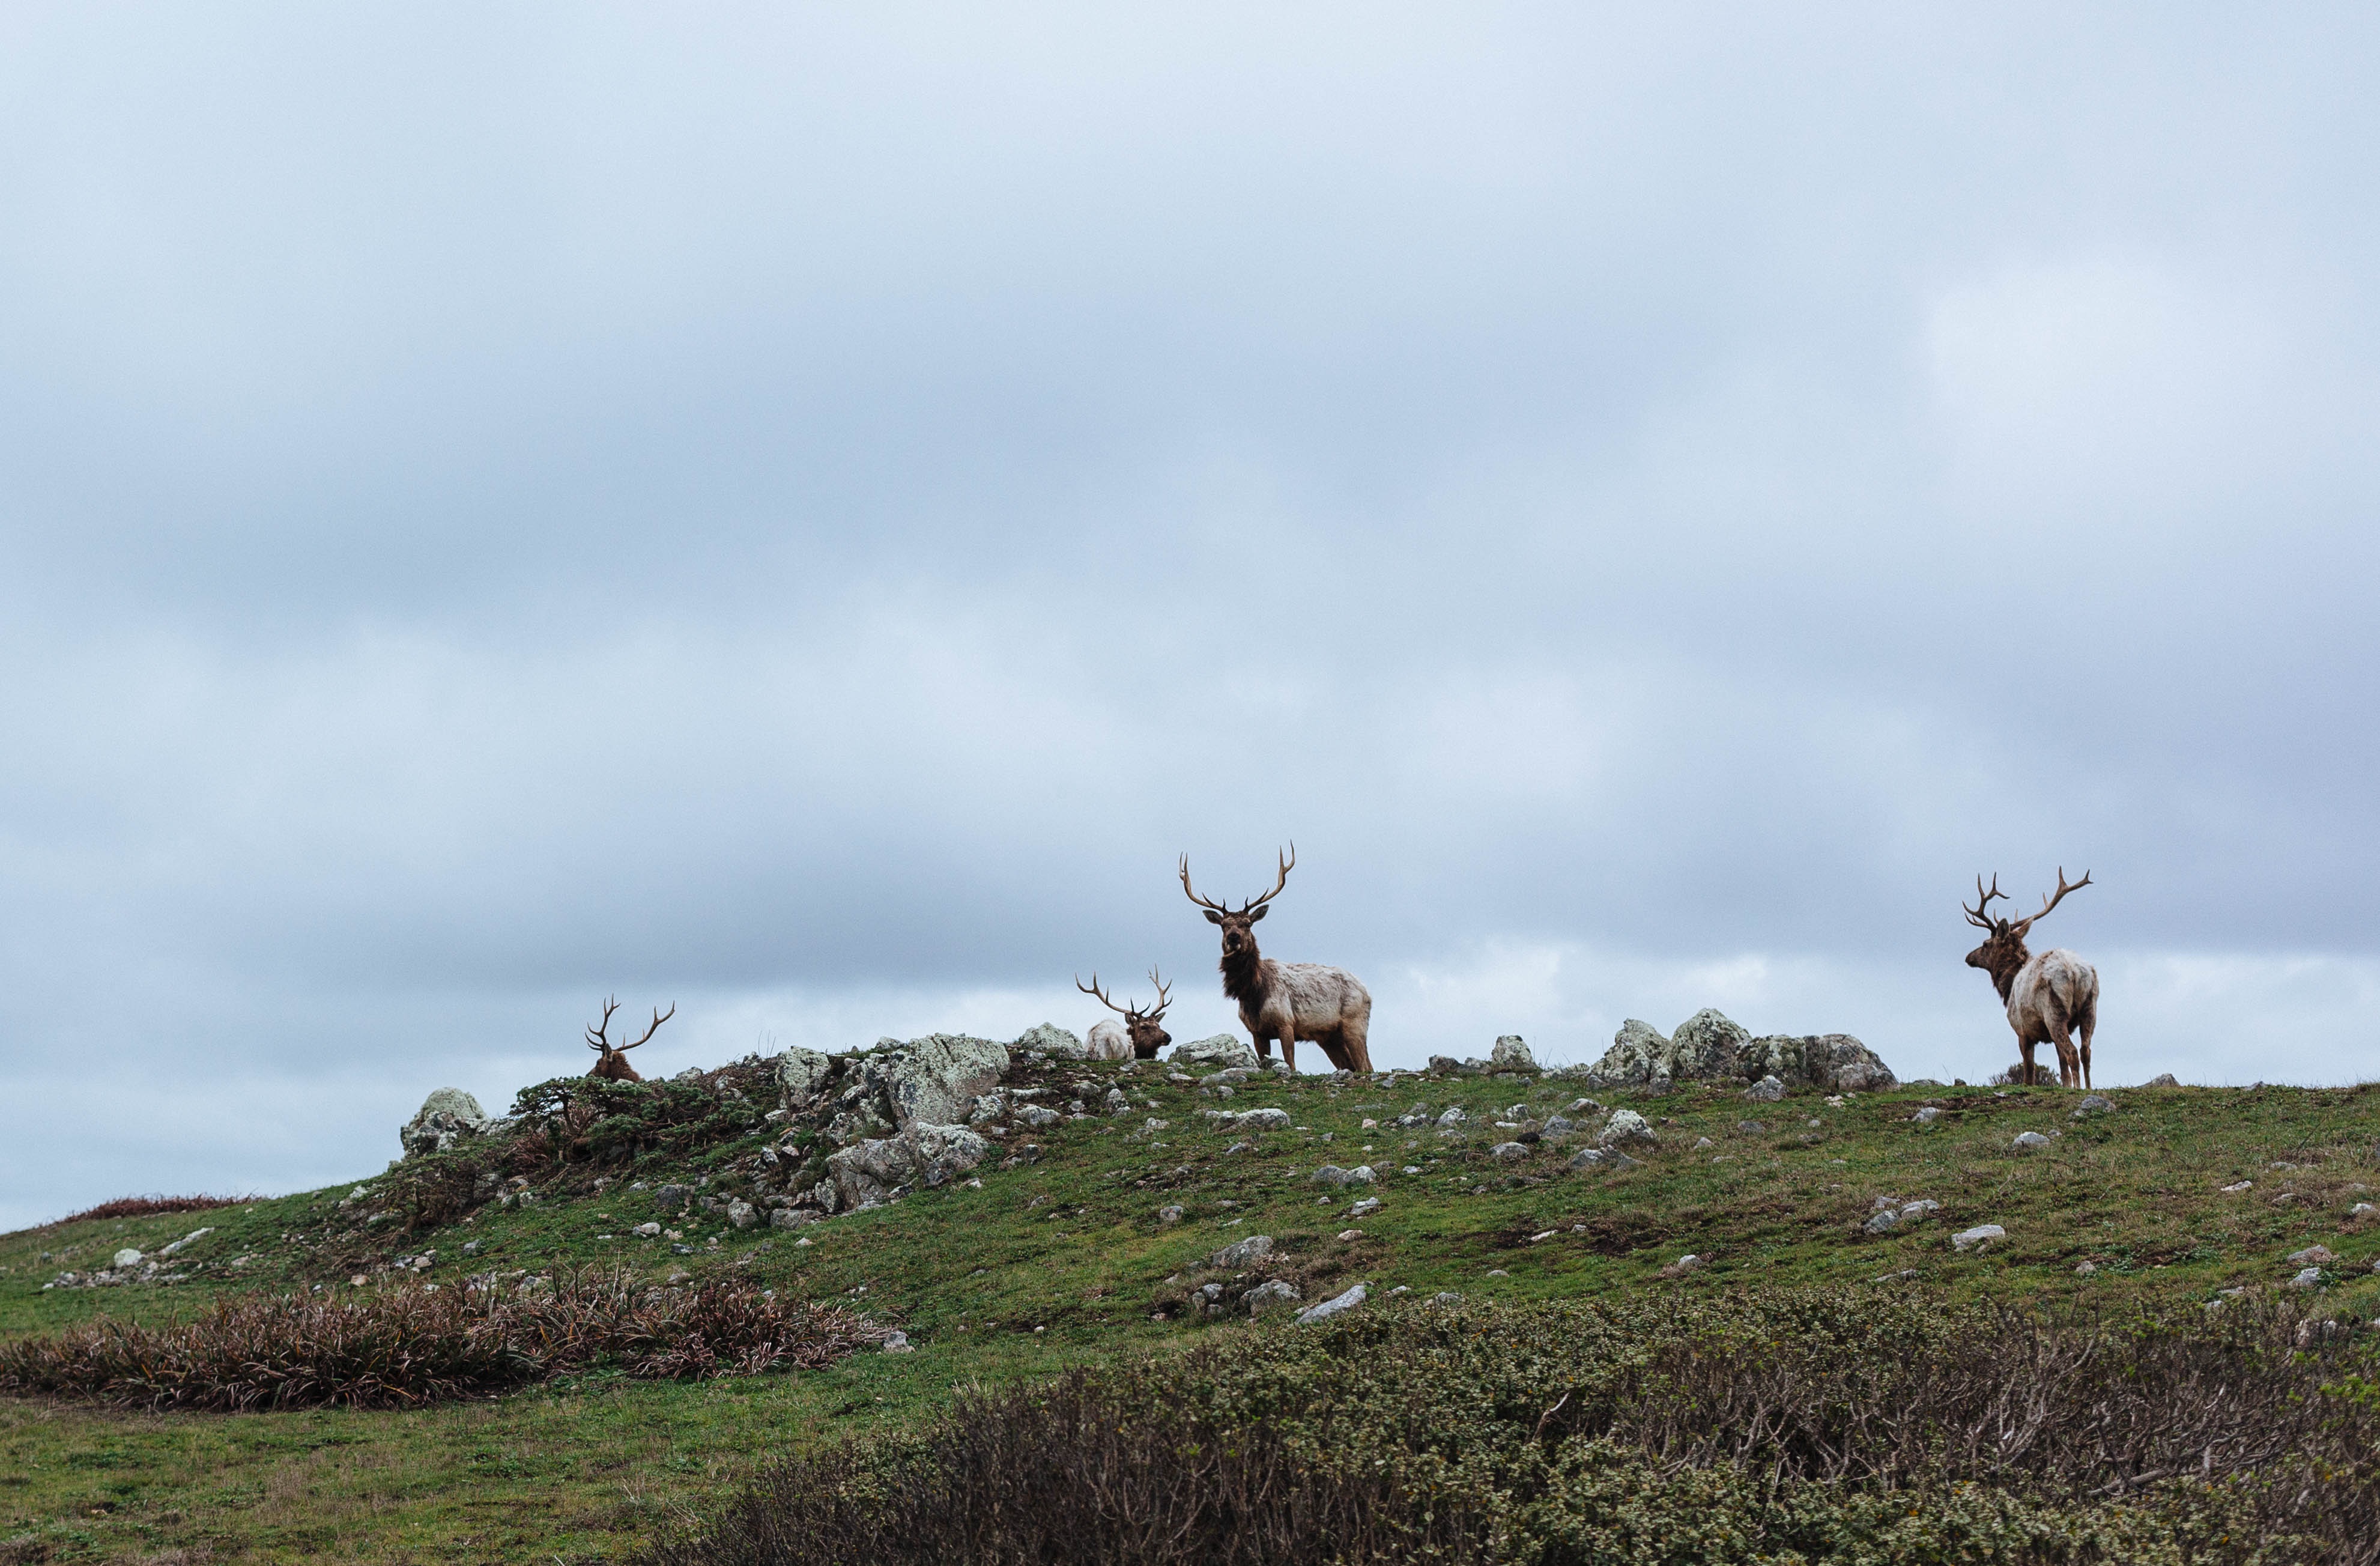 Horned deer graze in the steppe on a hill